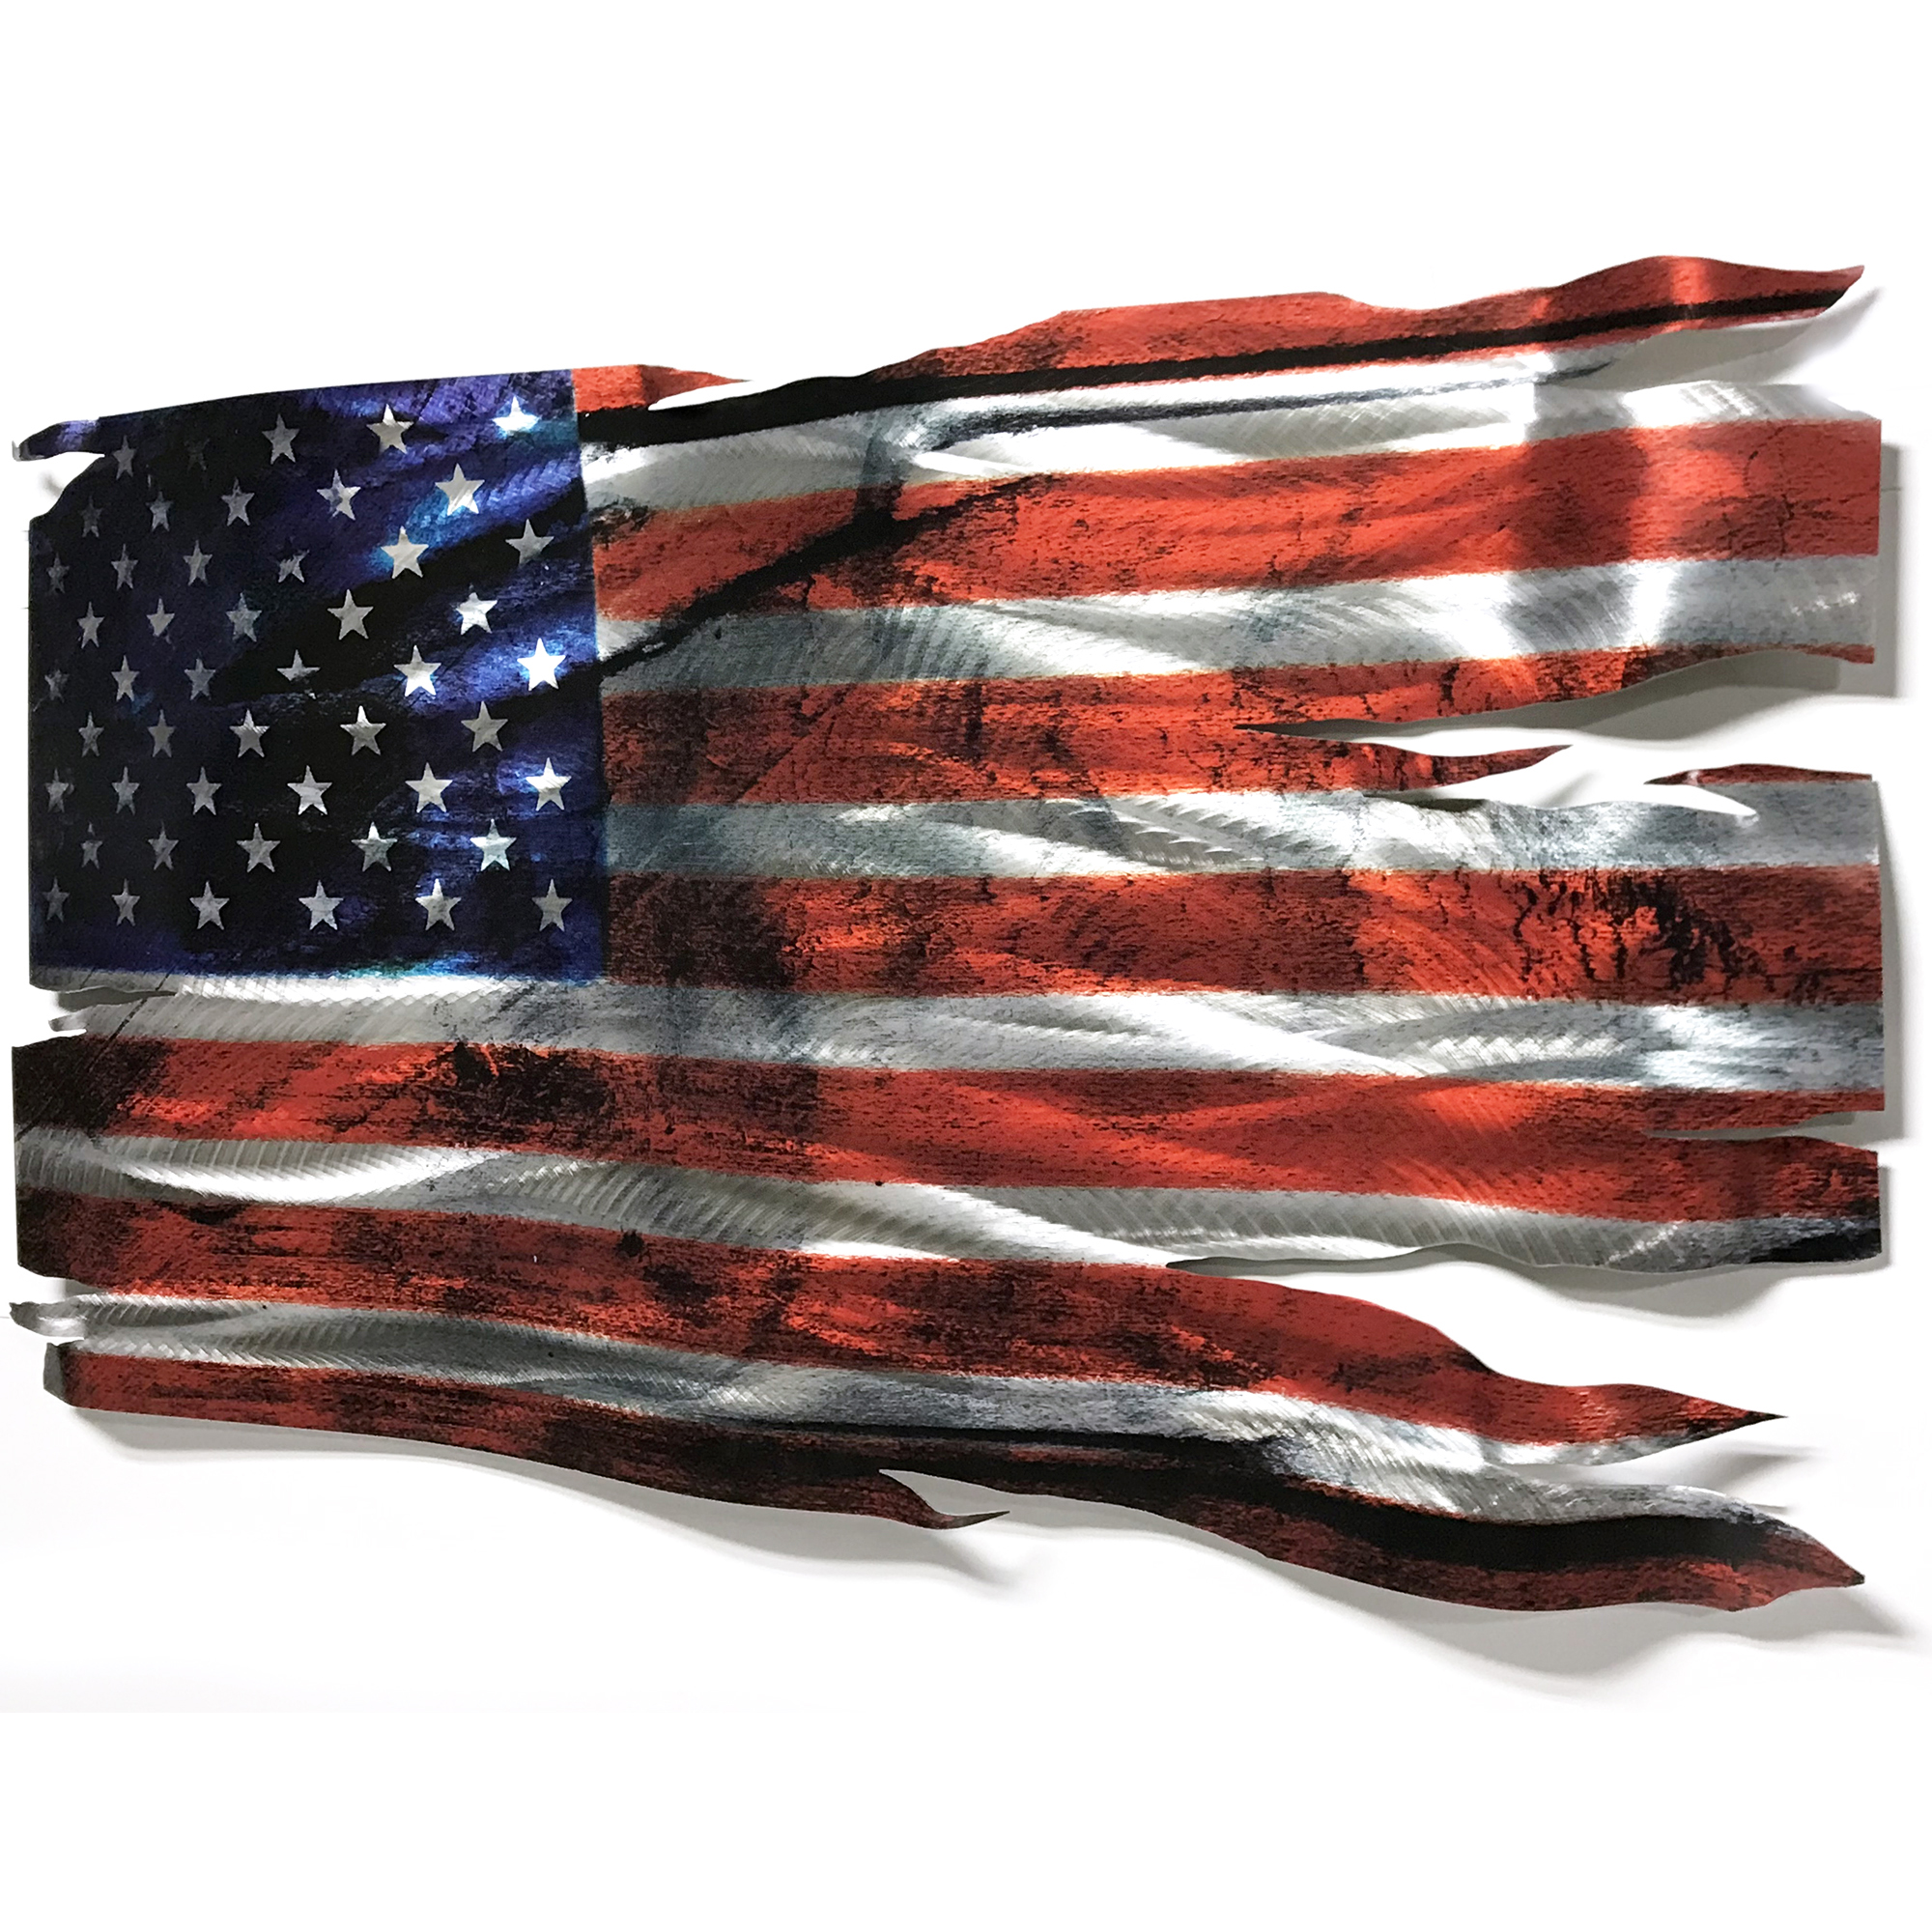 Tattered Glory by Helena Martin | Patriotic Metal Wall Sculpture - HM1776